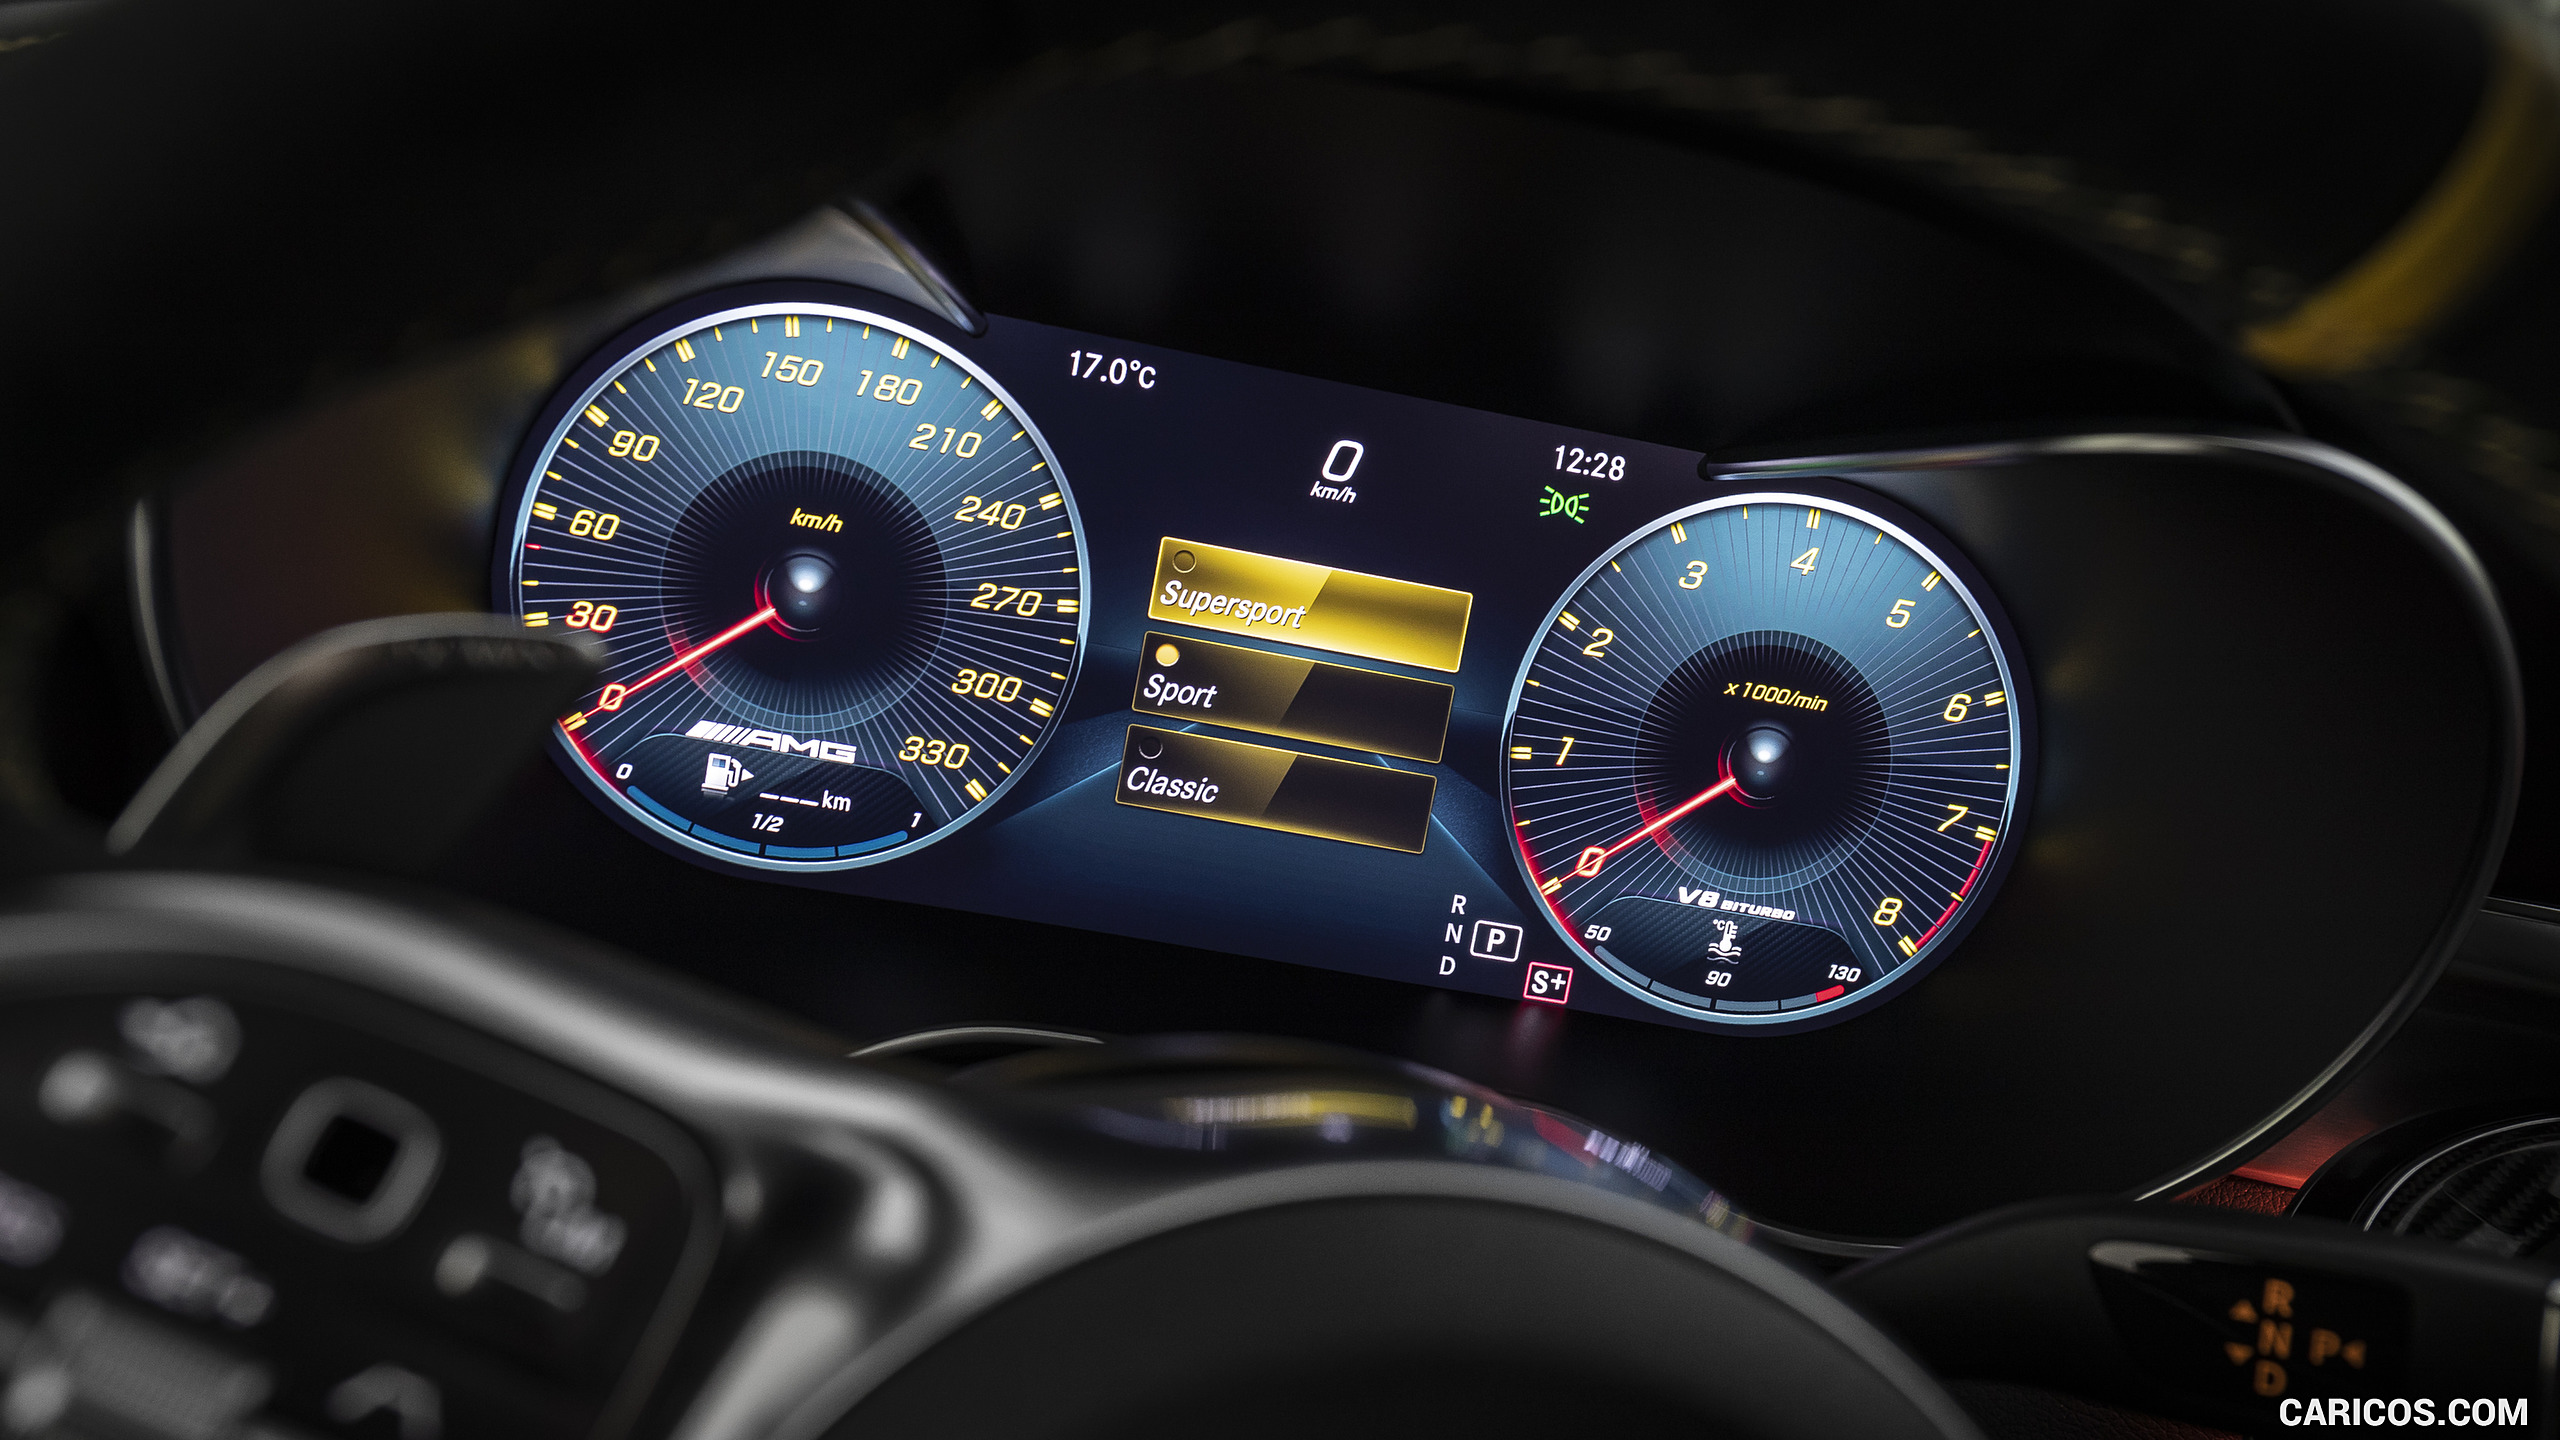 2019 Mercedes-AMG C 63 S Coupe - Digital Instrument Cluster, #97 of 106